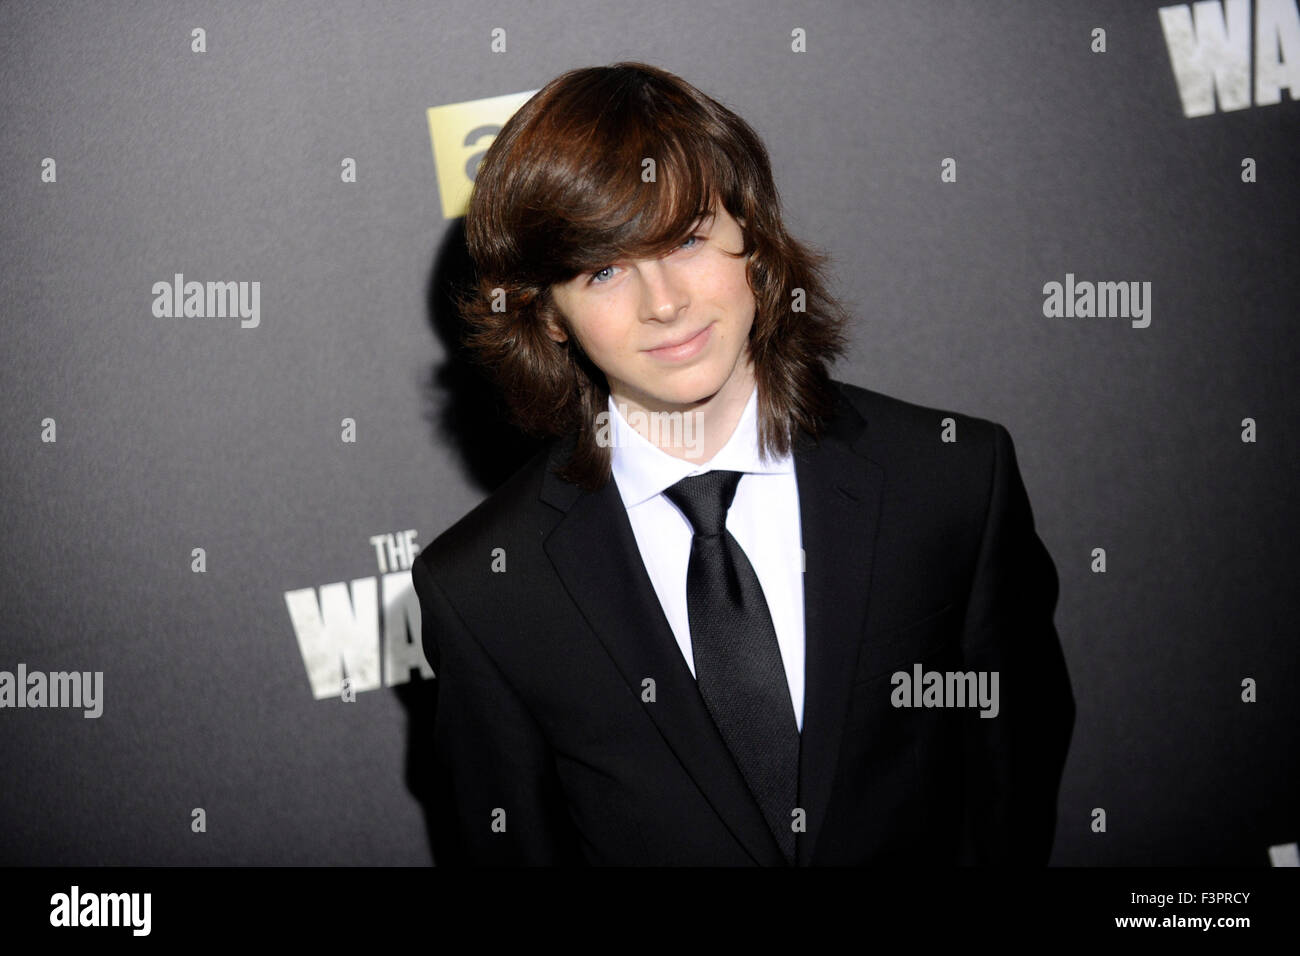 New York City. 9th Oct, 2015. Chandler Riggs attends AMC's 'The Walking Dead' Season 6 Fan Premiere Event 2015 at Madison Square Garden on October 9, 2015 in New York City. © dpa/Alamy Live News Stock Photo